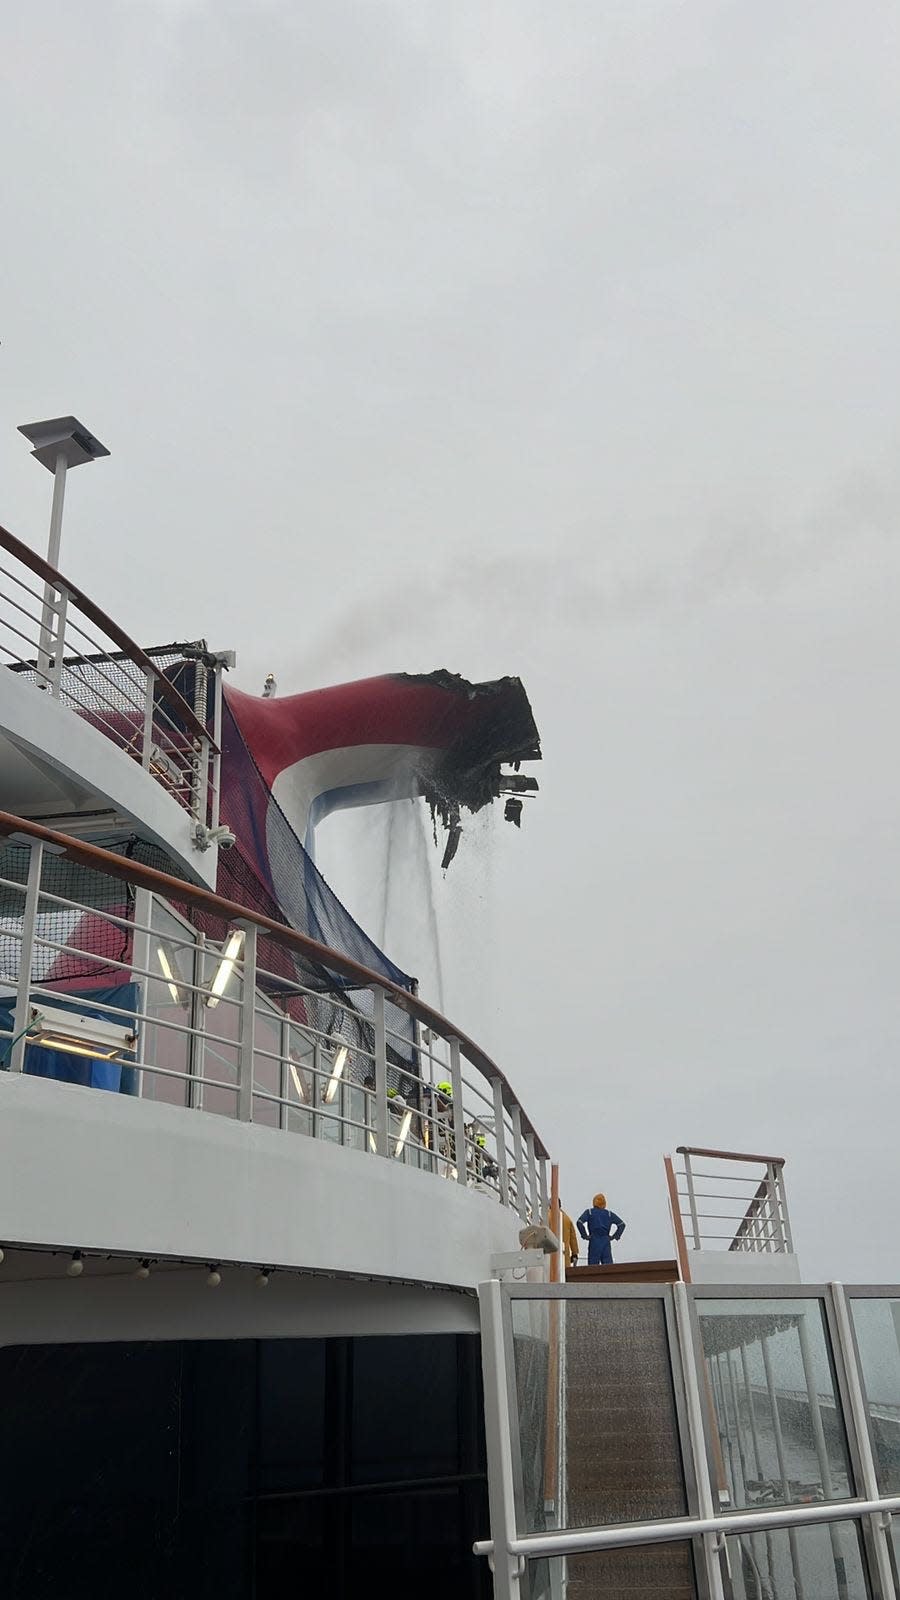 This photo shows damage to the Carnival Freedom cruise ship's exhaust funnel caused by a fire while it was at sea Saturday.